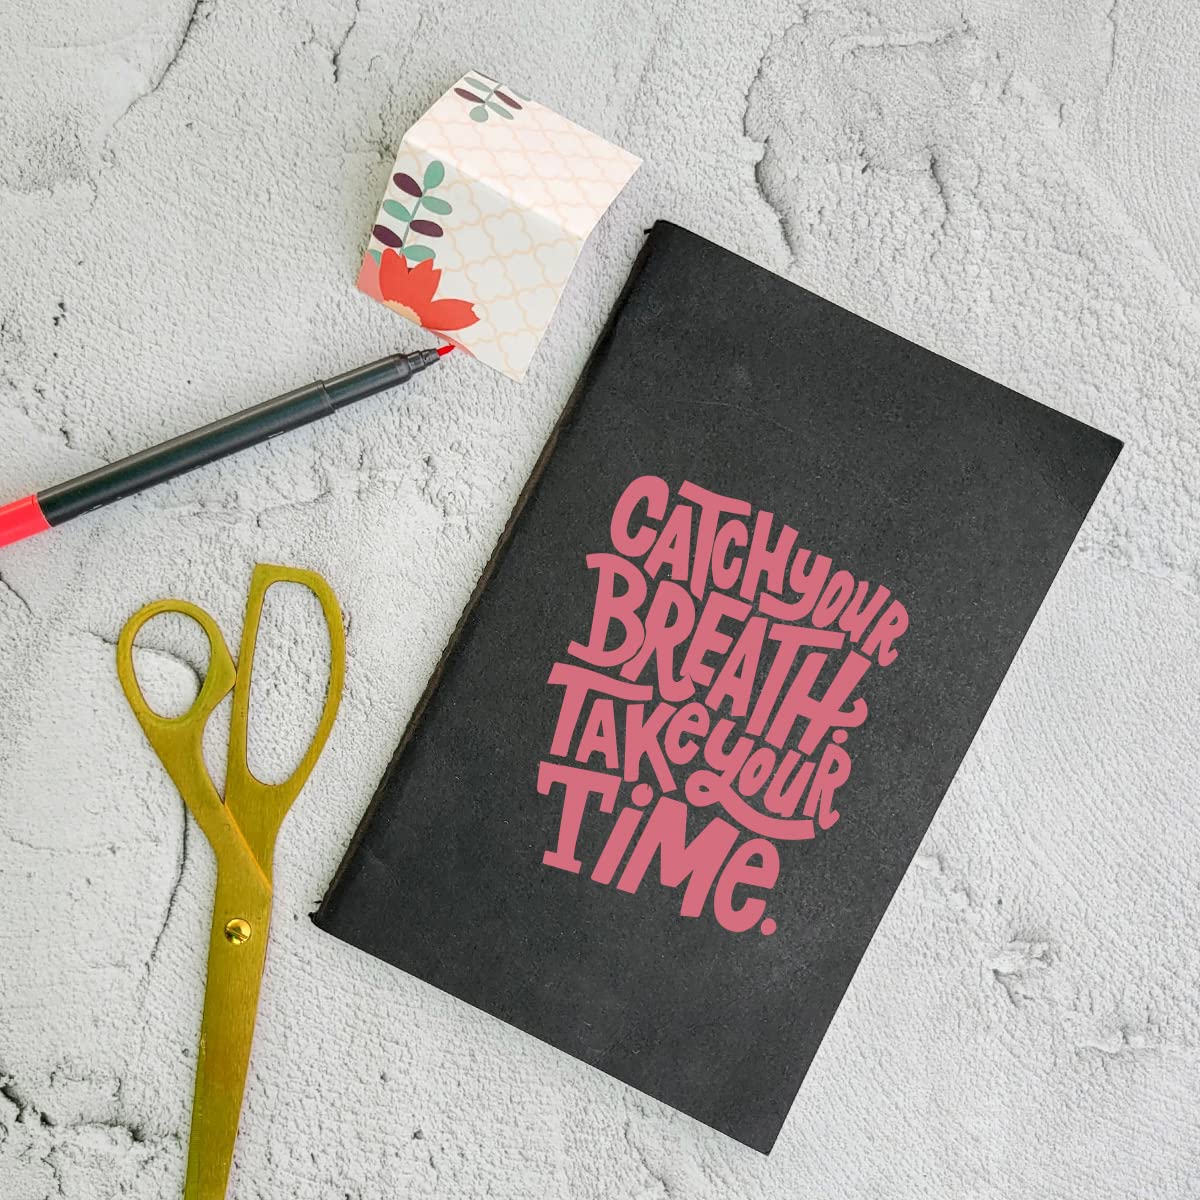 Catch Your Breath - Black A5 Doodle Notebook - Kraft Cover Notebook - A5 - 300 GSM Kraft Cover - Handmade - Unruled - 80 Pages - Natural Shade Pages 120 GSM - Funny Quotes & Quirky, Funky designs